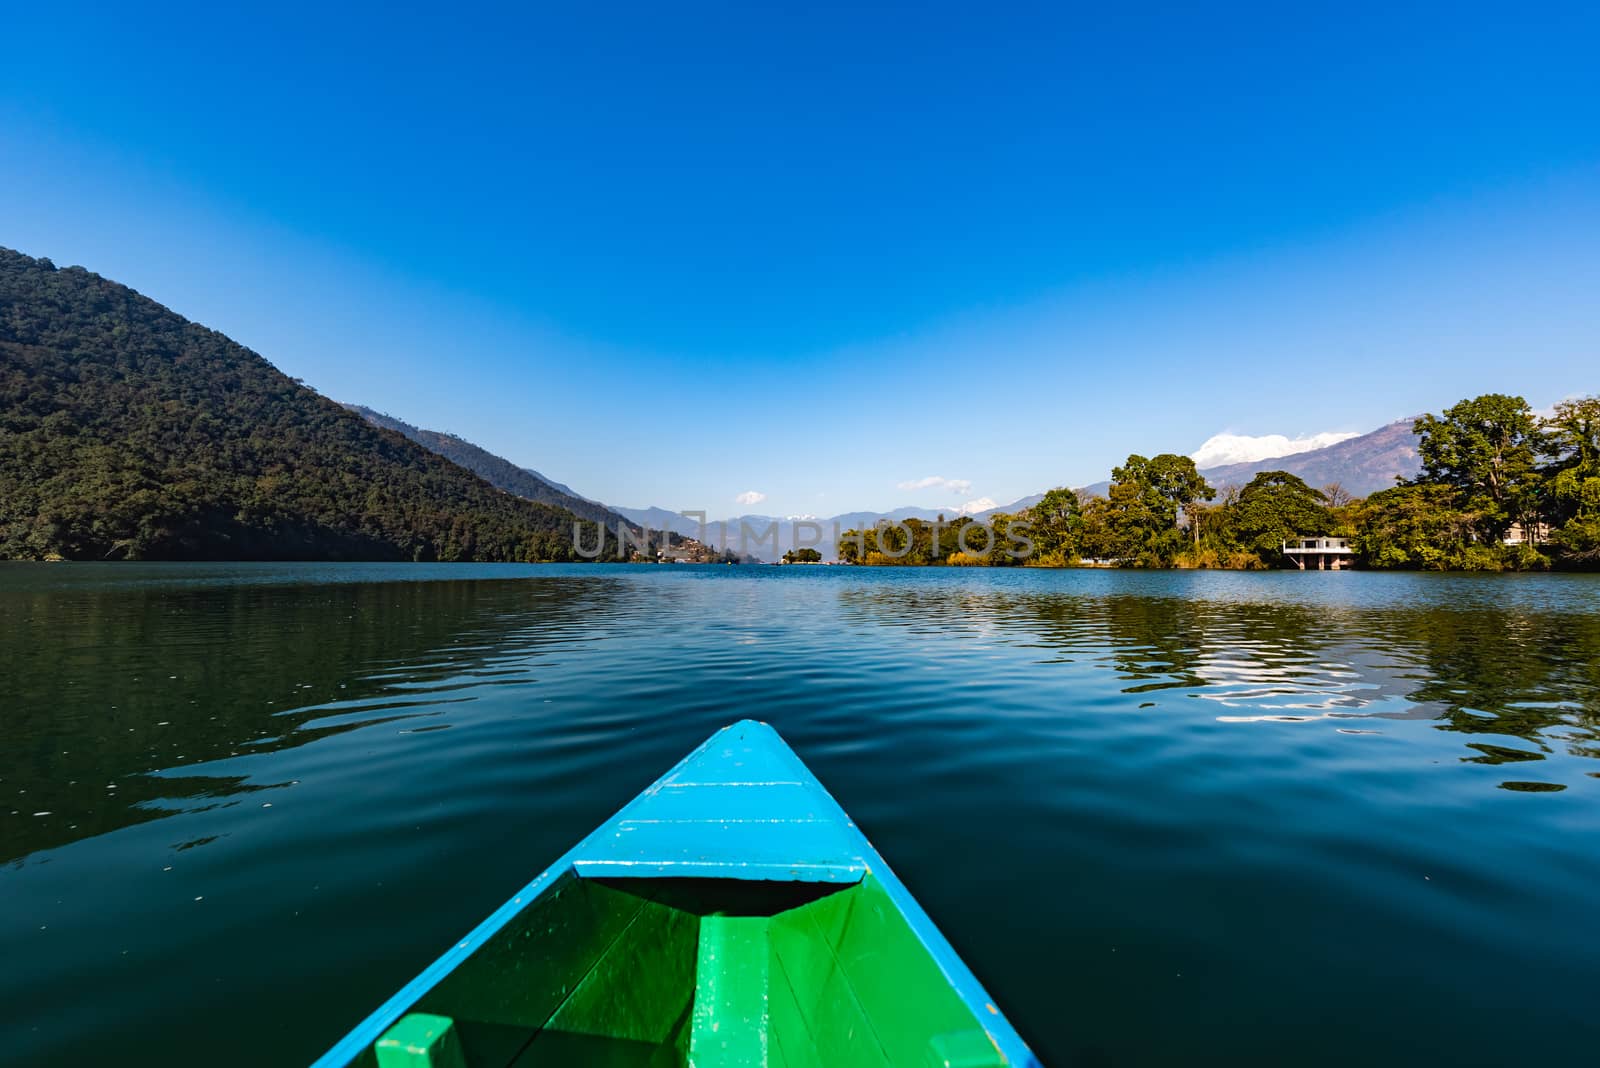 a canoe in the lake of Pokhara on Nepal